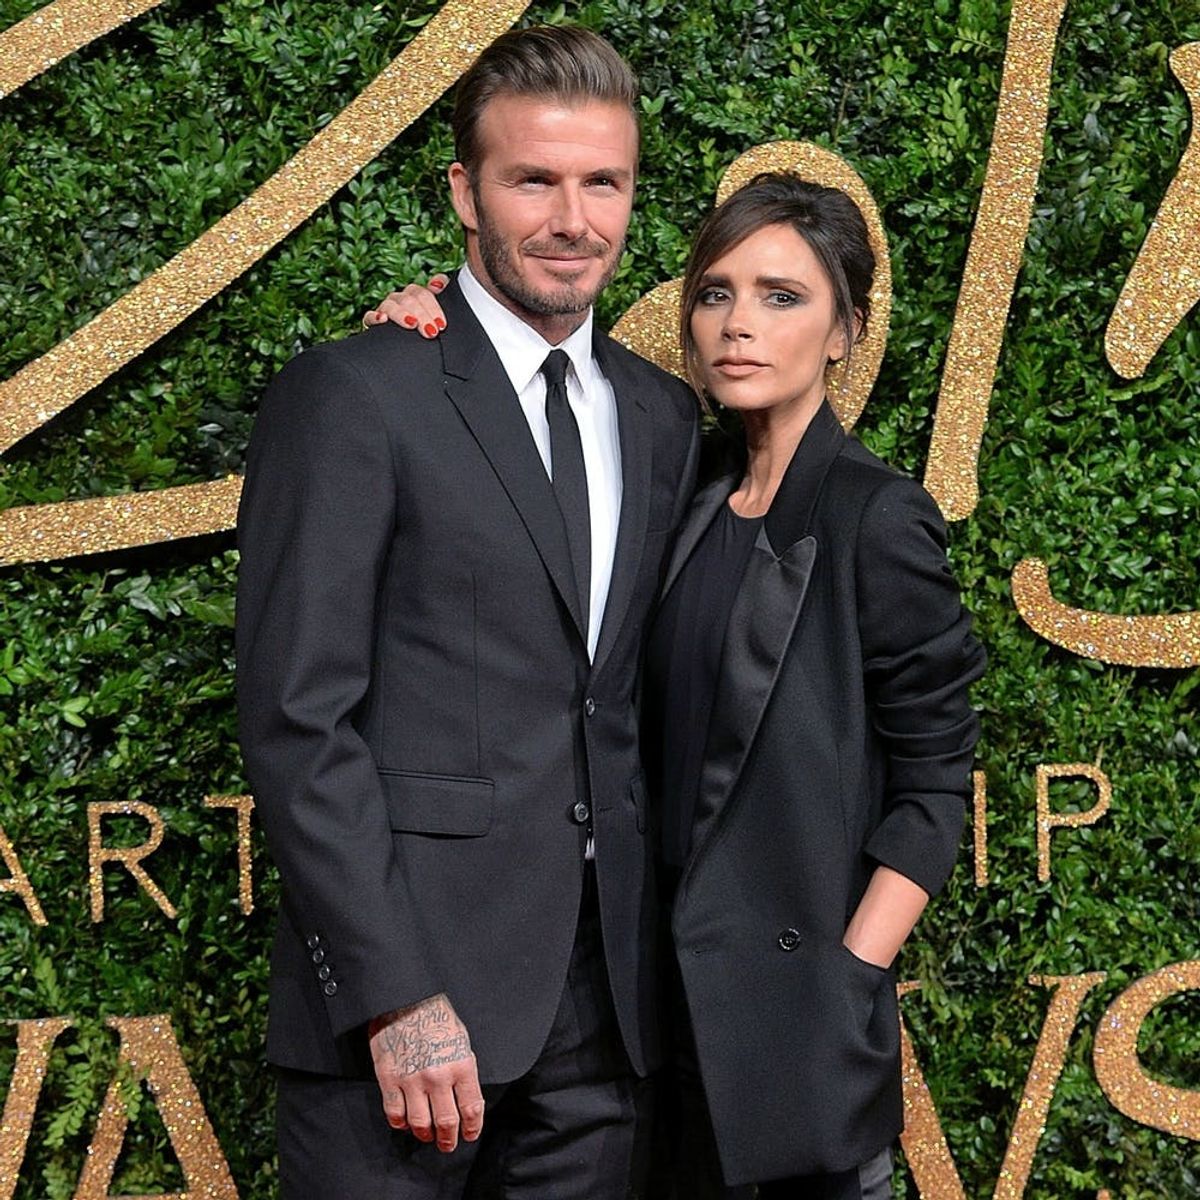 This Is What Made Victoria Beckham Fall in Love With David Beckham at First Sight